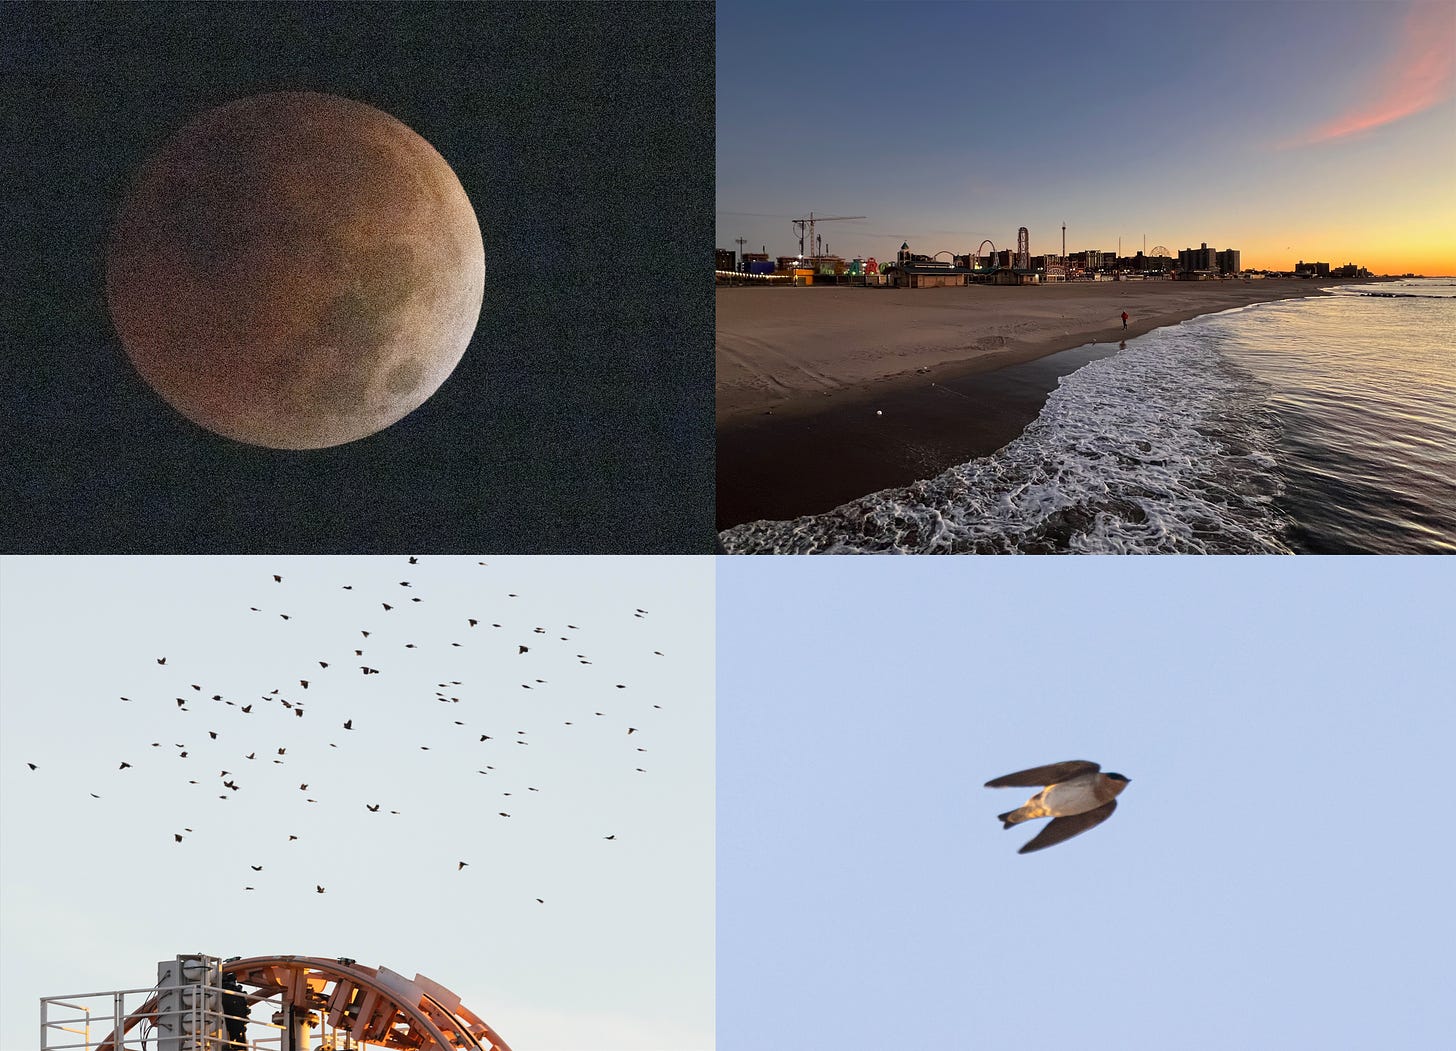 four images. the top left shows a grainy photo of a lunar eclipse, where the moon is mostly reddish-brown. the top right shows sunrise over coney island, looking northeast from the pier at the roller coasters with the beach and ocean in the foreground. bottom left shows a big flock of blackbirds flying to the left in the sky just above a roller coaster. on the bottom right is a cave swallow, a white-bellied, orange-throated swallow with long, pointed wings facing downward reaching its short, slightly-forked tail